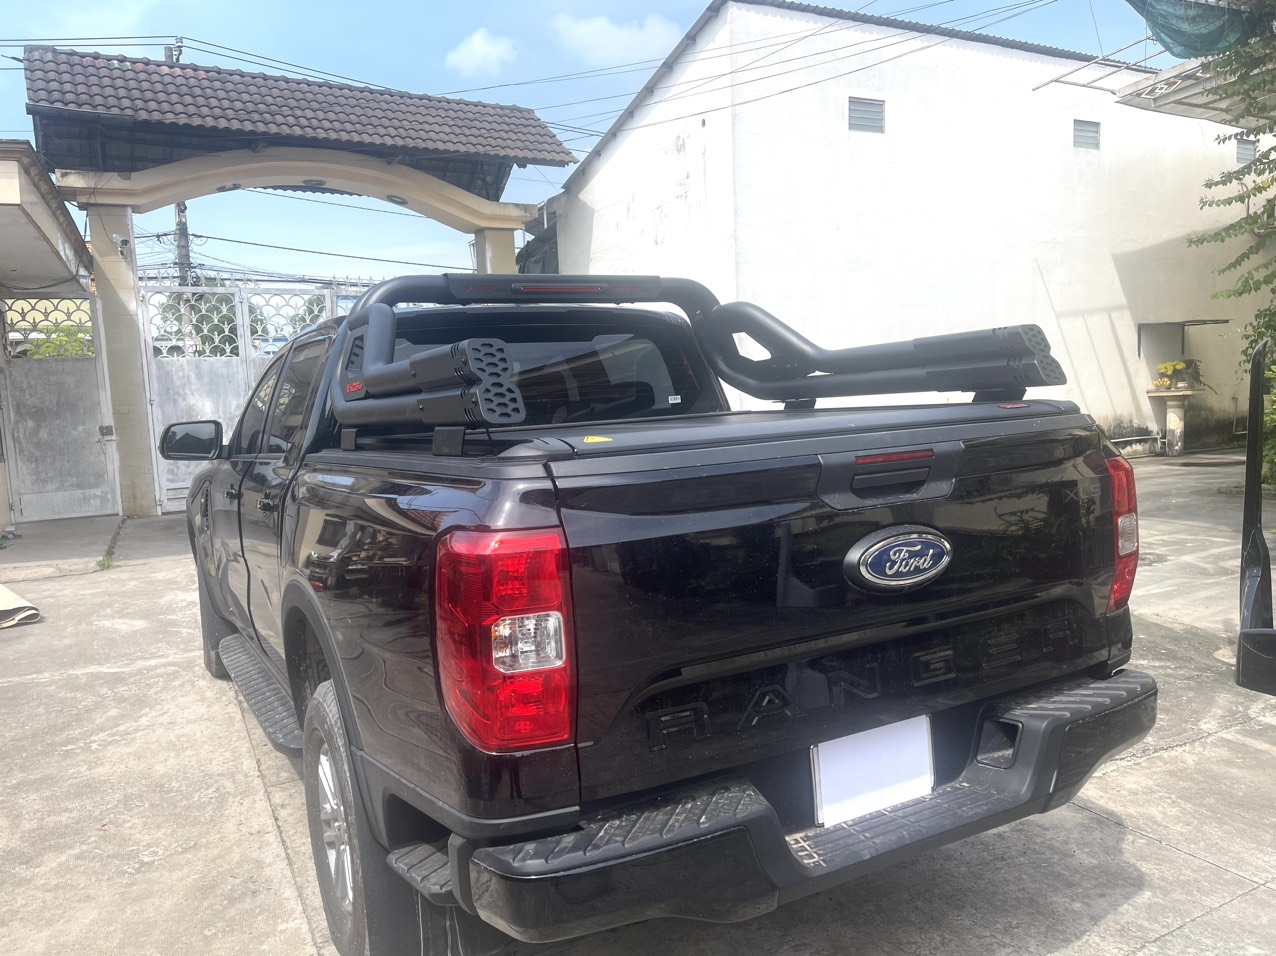 THANH THỂ THAO OFFROAD FORD RANGER